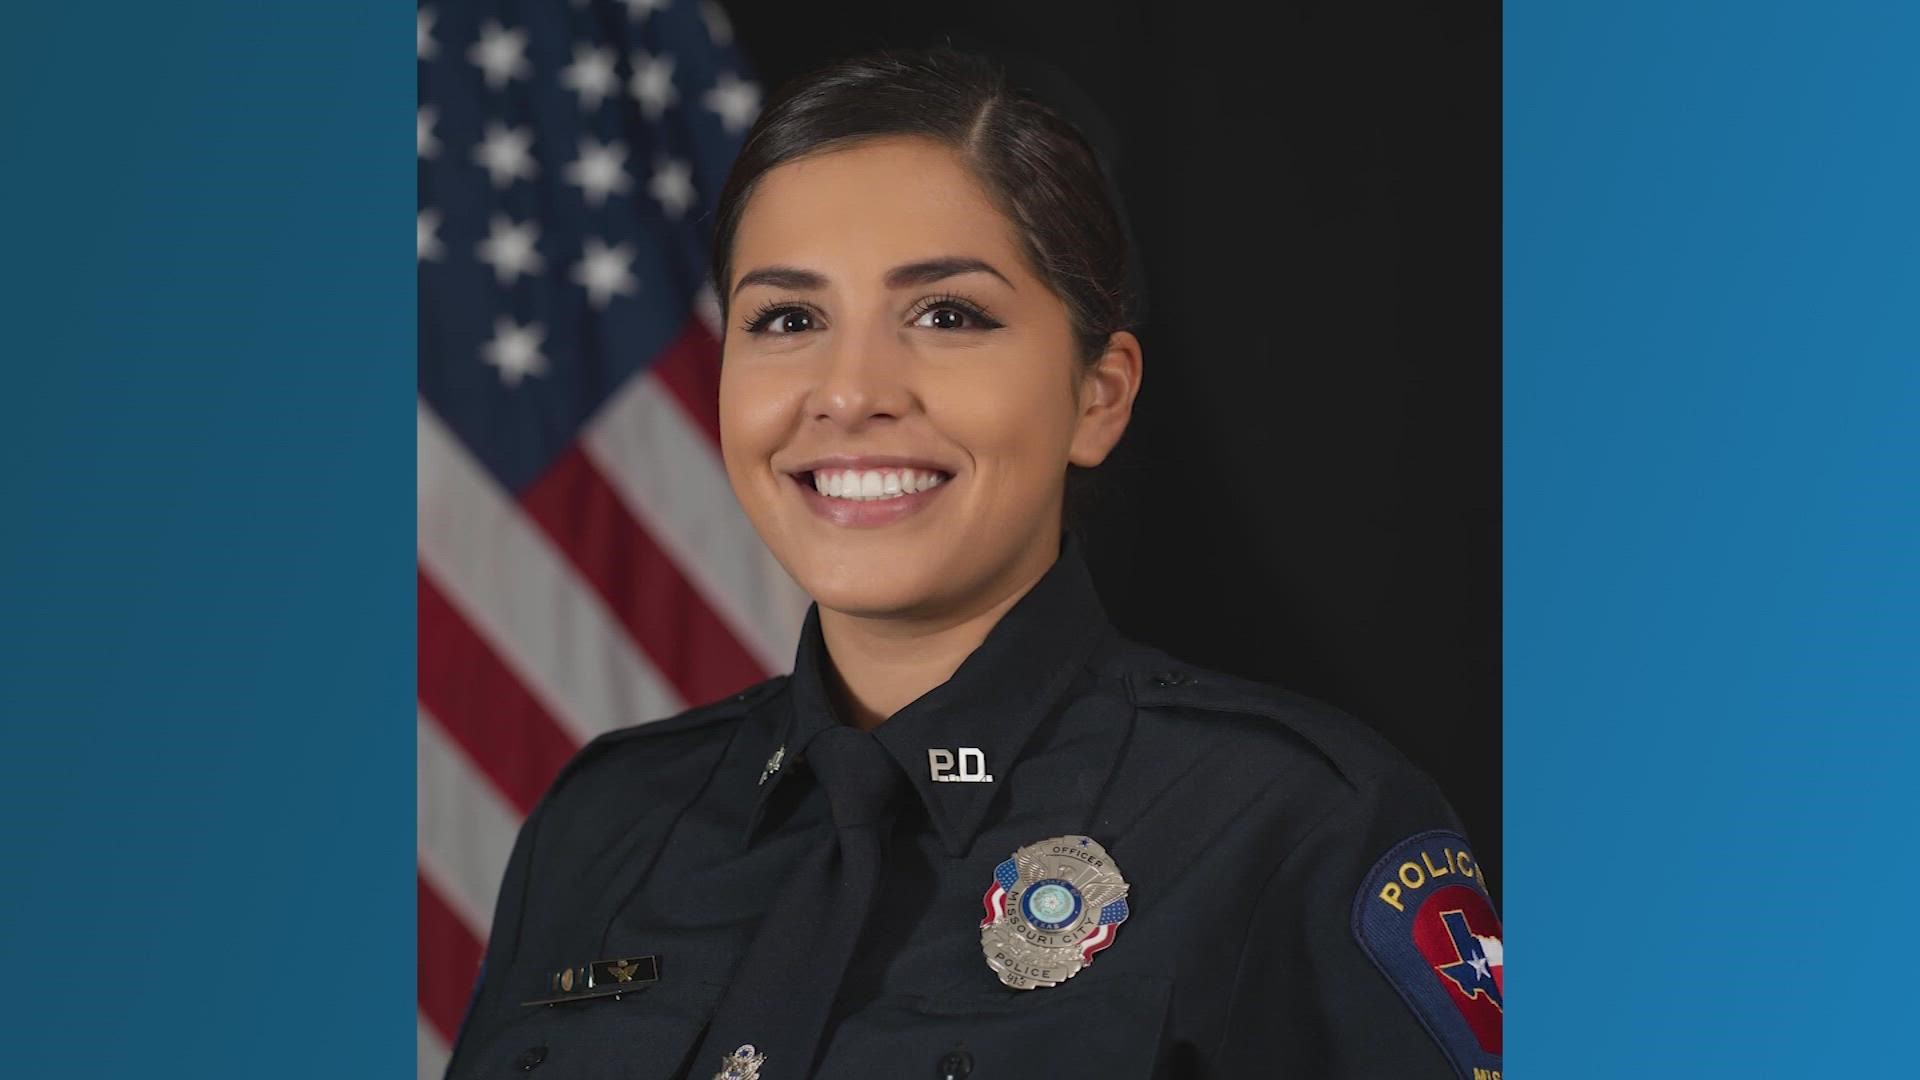 Officer Crystal Sepulveda remains in the hospital, but her spirits remain high even after she was shot multiple times last weekend.